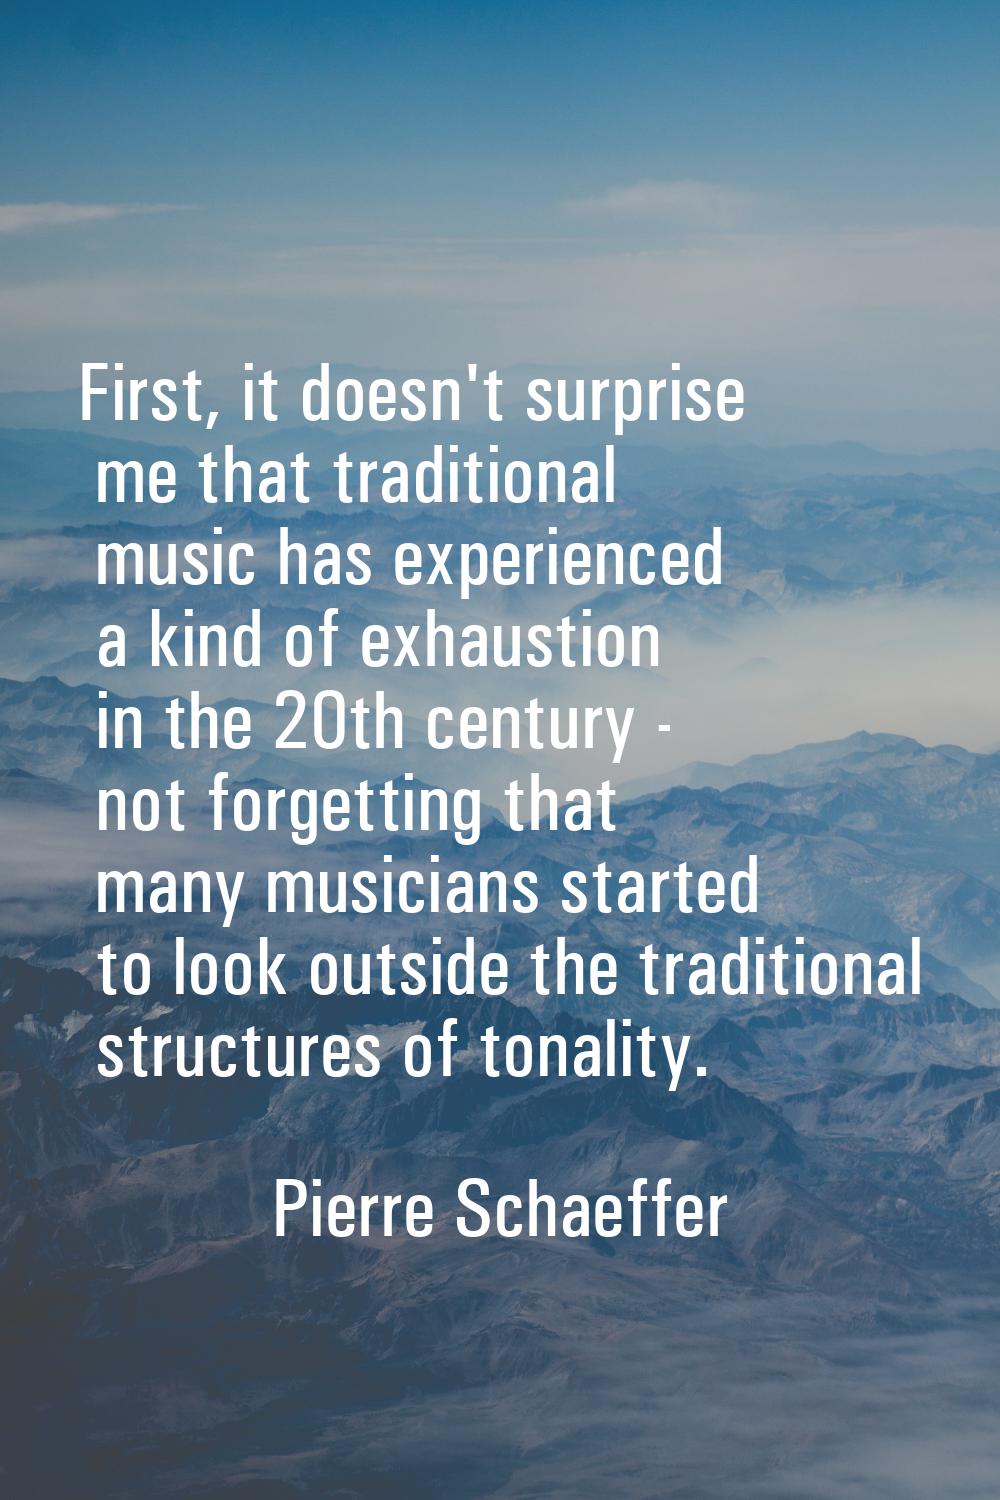 First, it doesn't surprise me that traditional music has experienced a kind of exhaustion in the 20